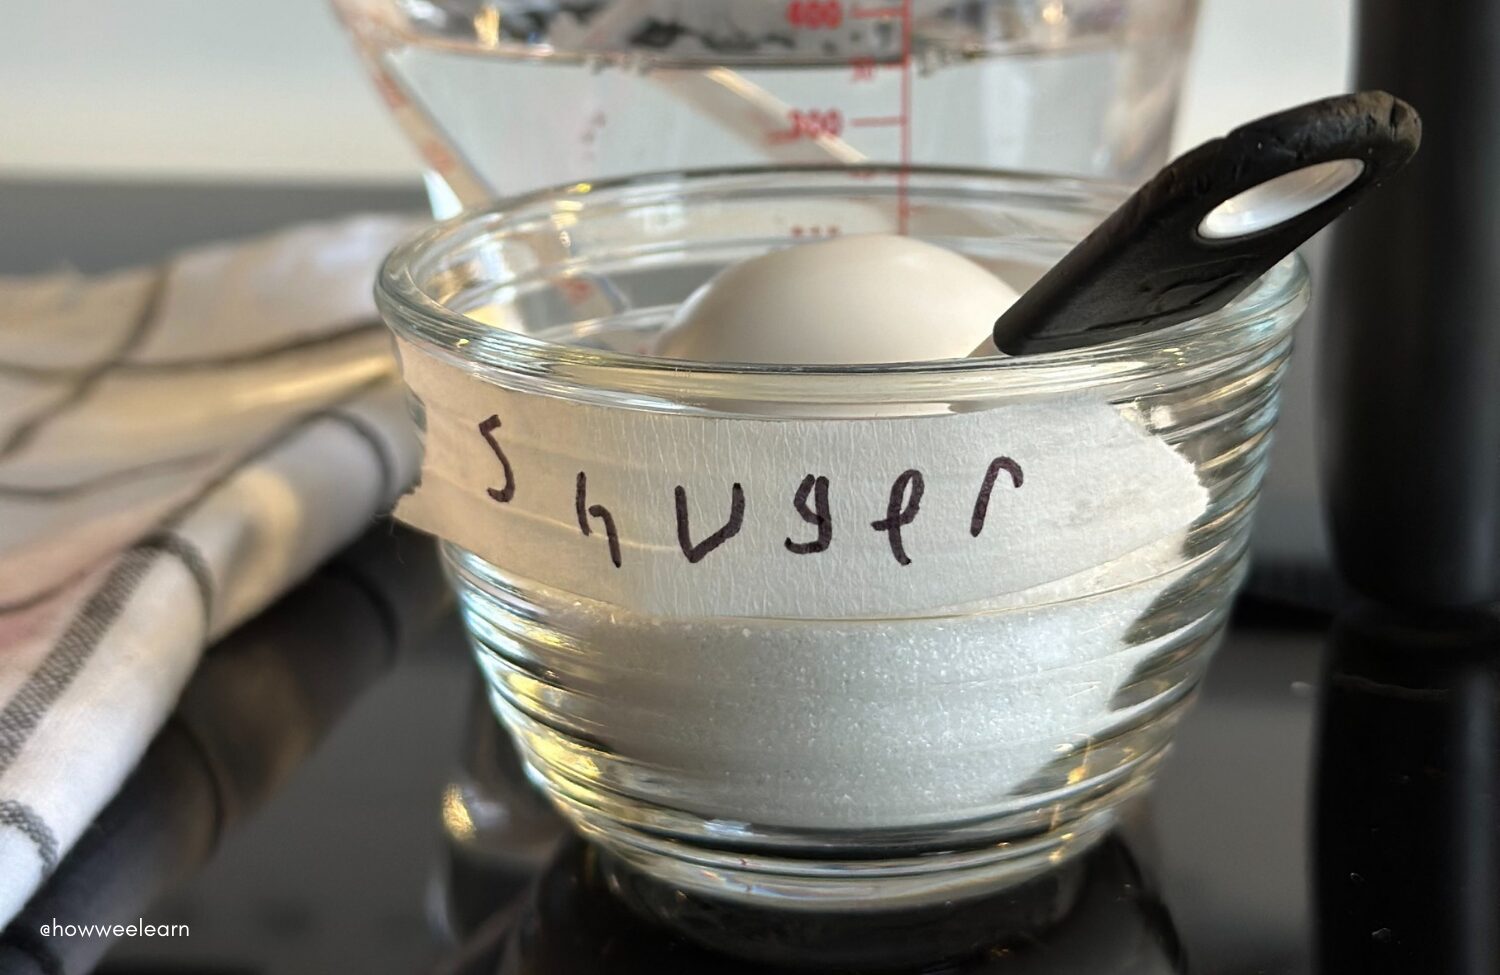 Small bowl of sugar with a label that says "shuger"